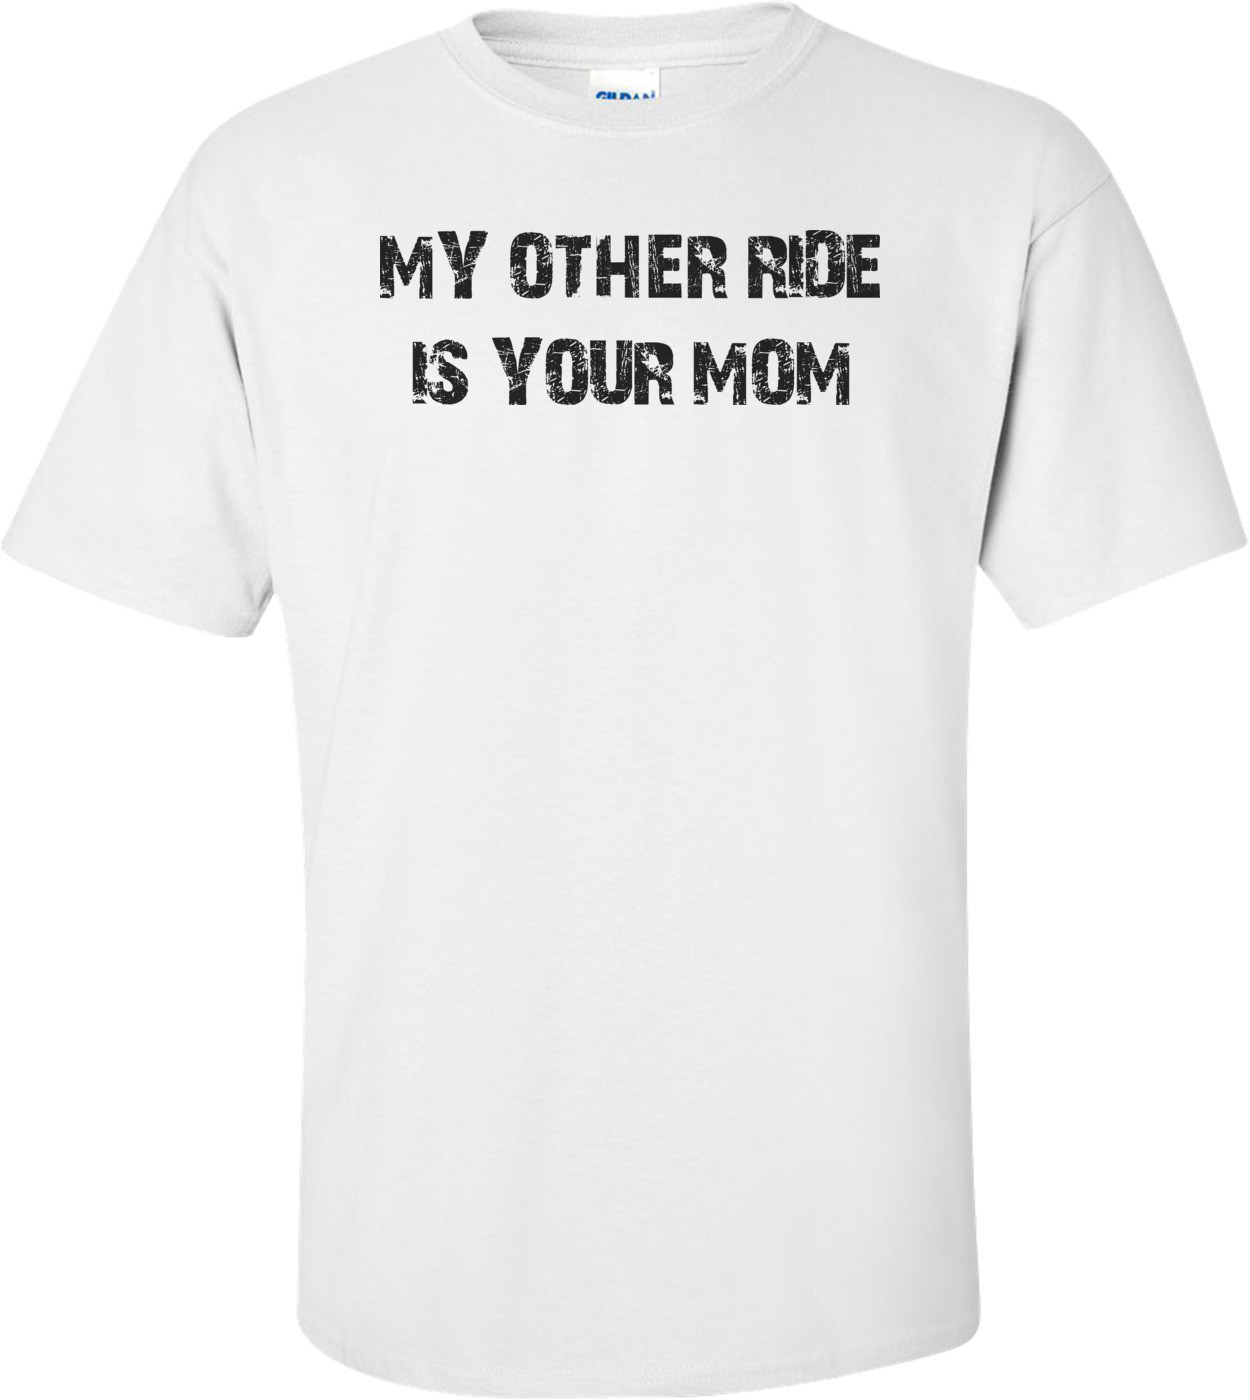 My Other Ride Is Your Mom Shirt